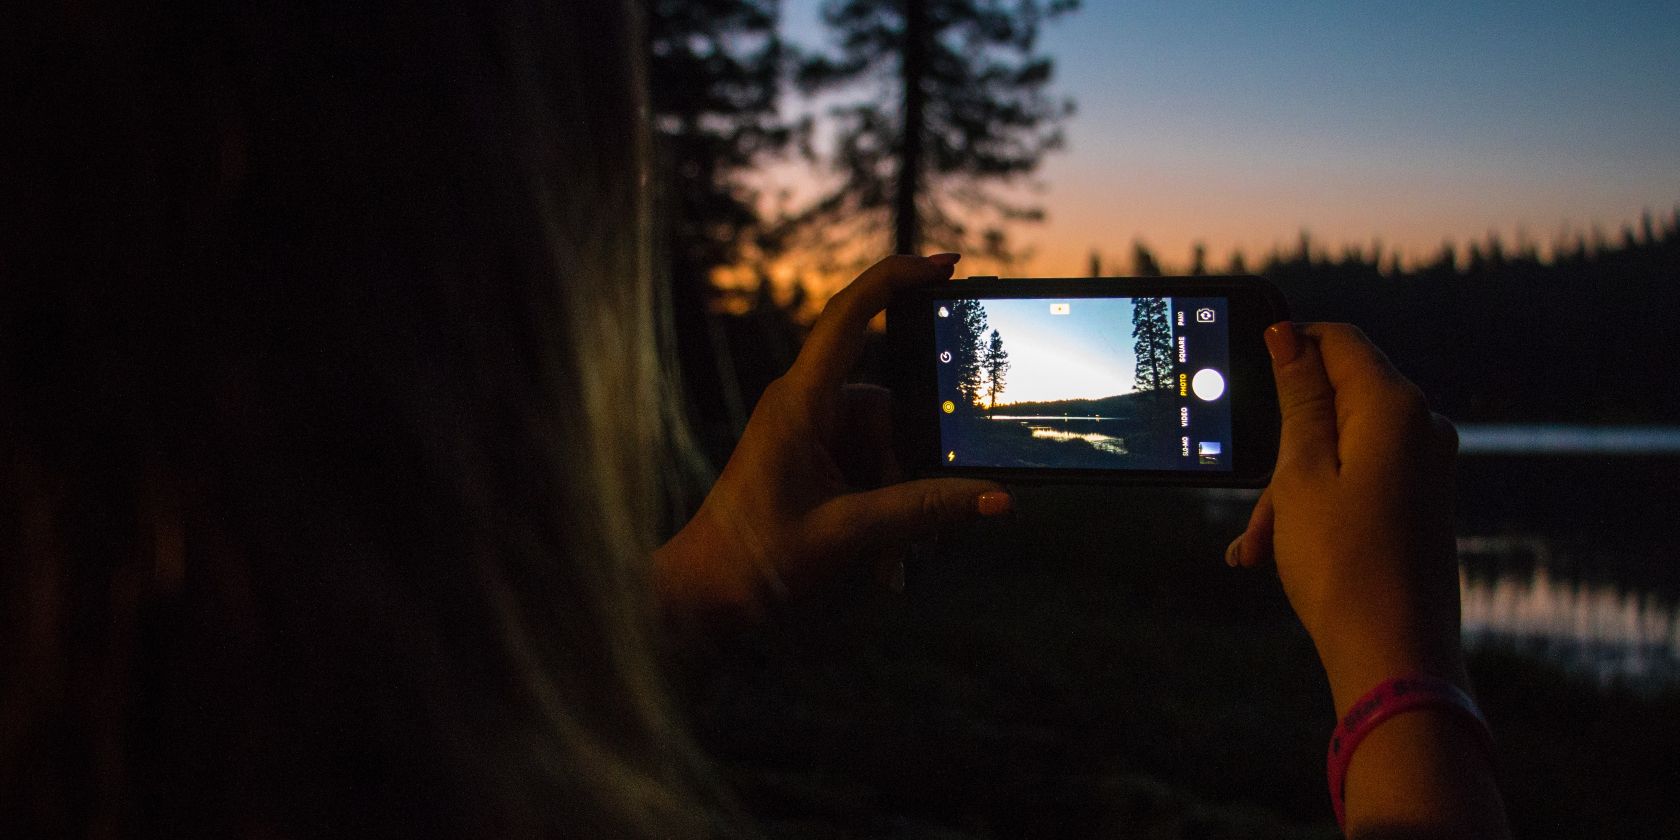 How to Take Good Photos With Your Smartphone in Low-Light Conditions: 7 Tips